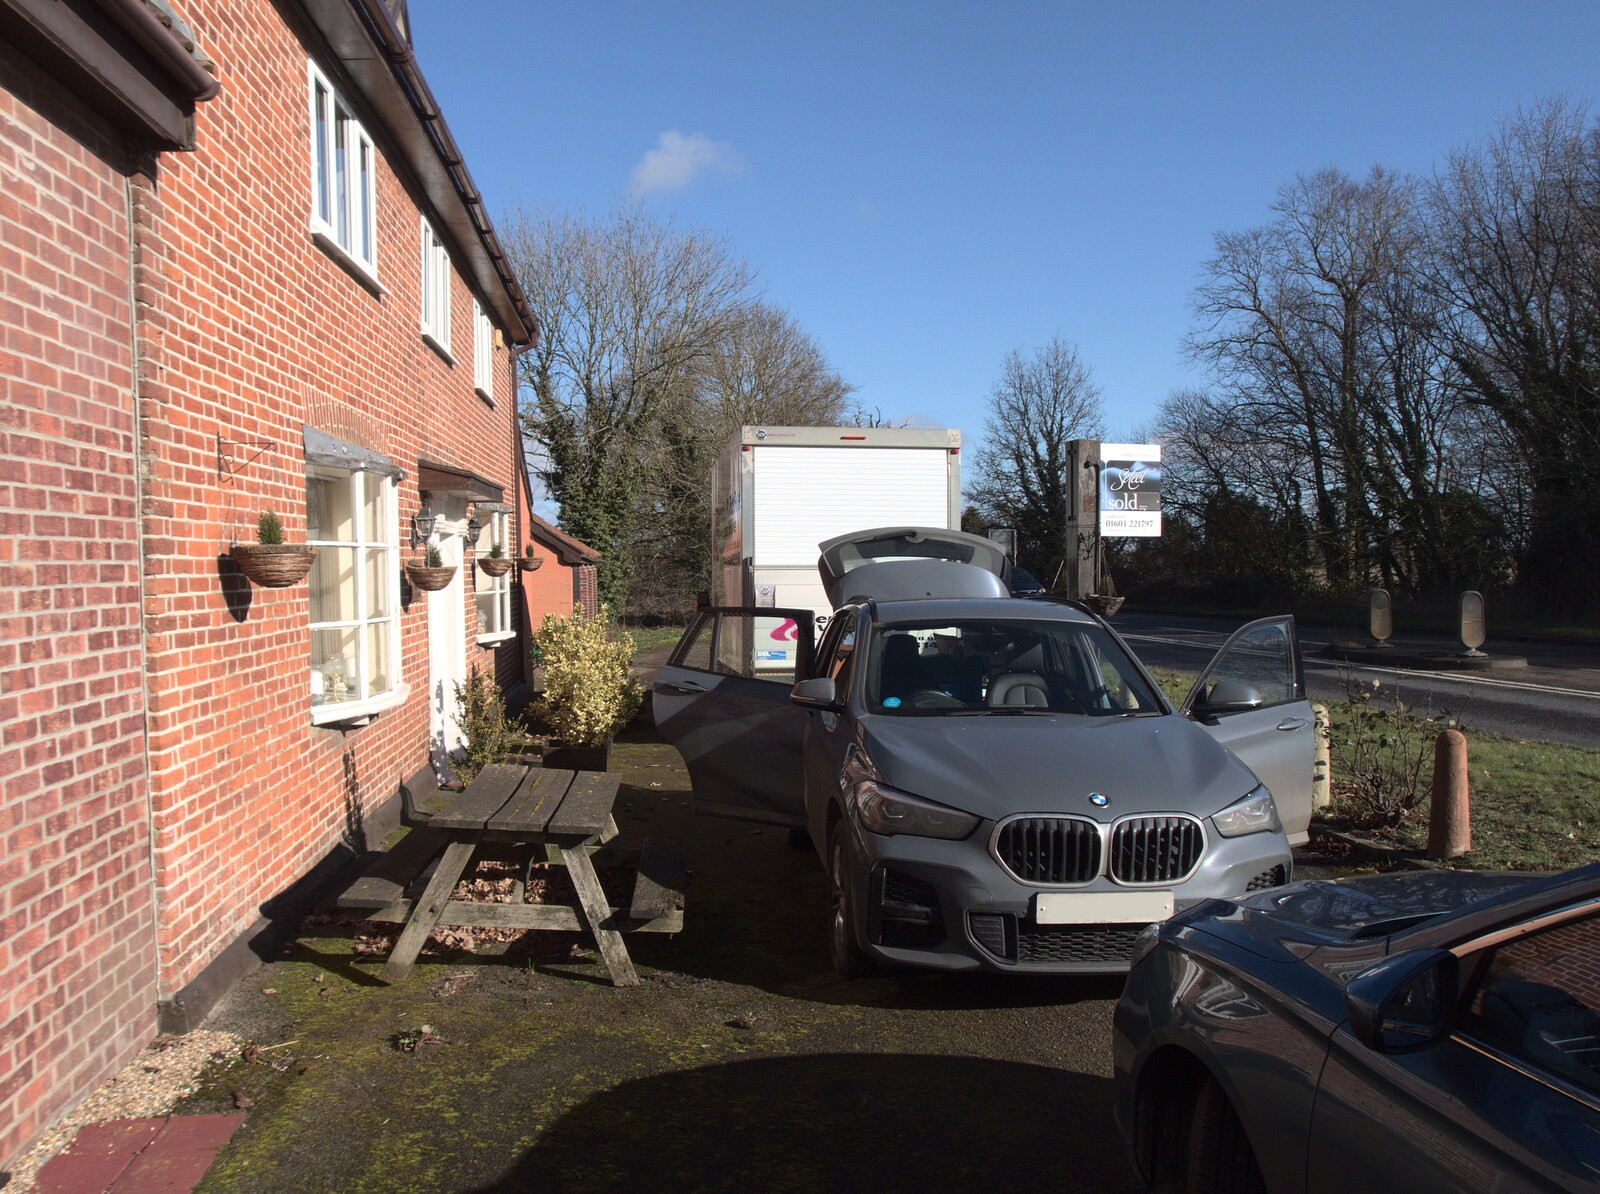 Cars and vans are ready to haul stuff away from The Swan Inn: An Epilogue, Brome, Suffolk - 17th February 2022